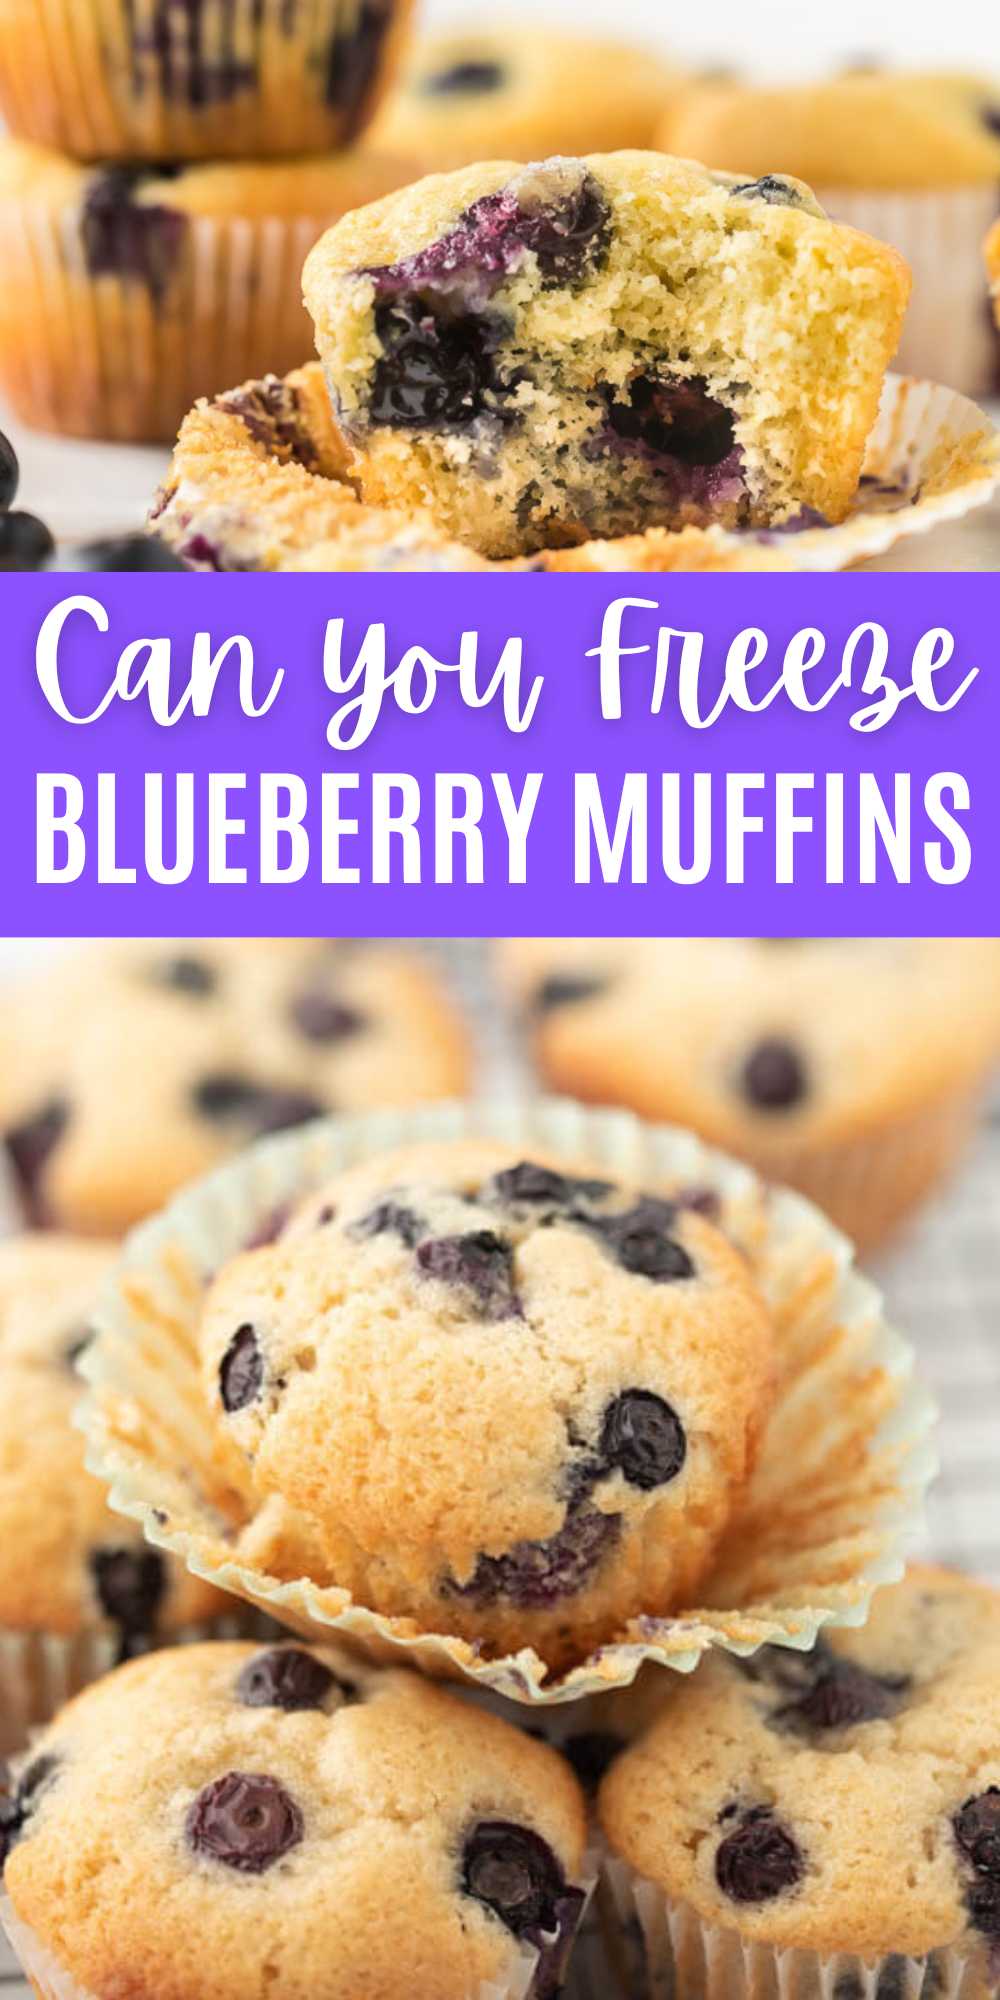 Can you Freeze Blueberry Muffins if you have leftovers. This simple process will give you the tips and tricks on how to properly freeze. By properly storing them, you can enjoy warm blueberry muffins easy breakfast or after school snack. Follow these easy tips to store your favorite muffins and the muffin batter. #eatingonadime #canyoufreezeblueberrymuffins #blueberrymuffins #freezingblueberrymuffins